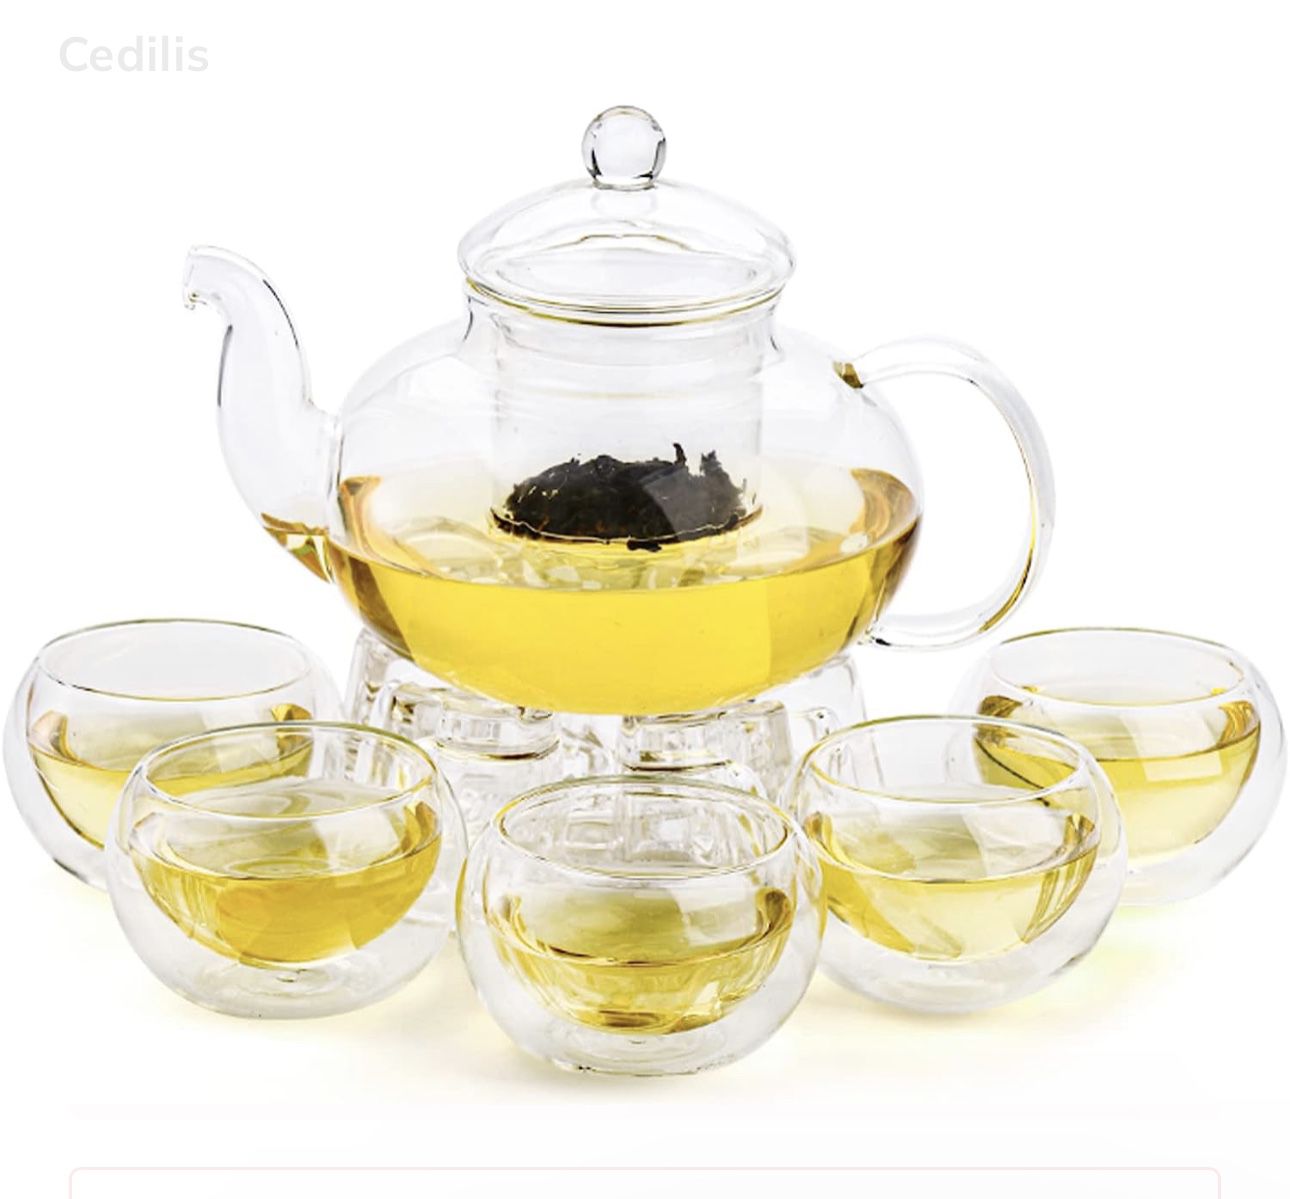 Cedilis 8pc 33oz Glass Teapot Set, Tea Kettle Infuser with a Candle Warmer, 5 Double Wall Cups and a Removable Strainer, Stovetop Safe, Tea Pot with B